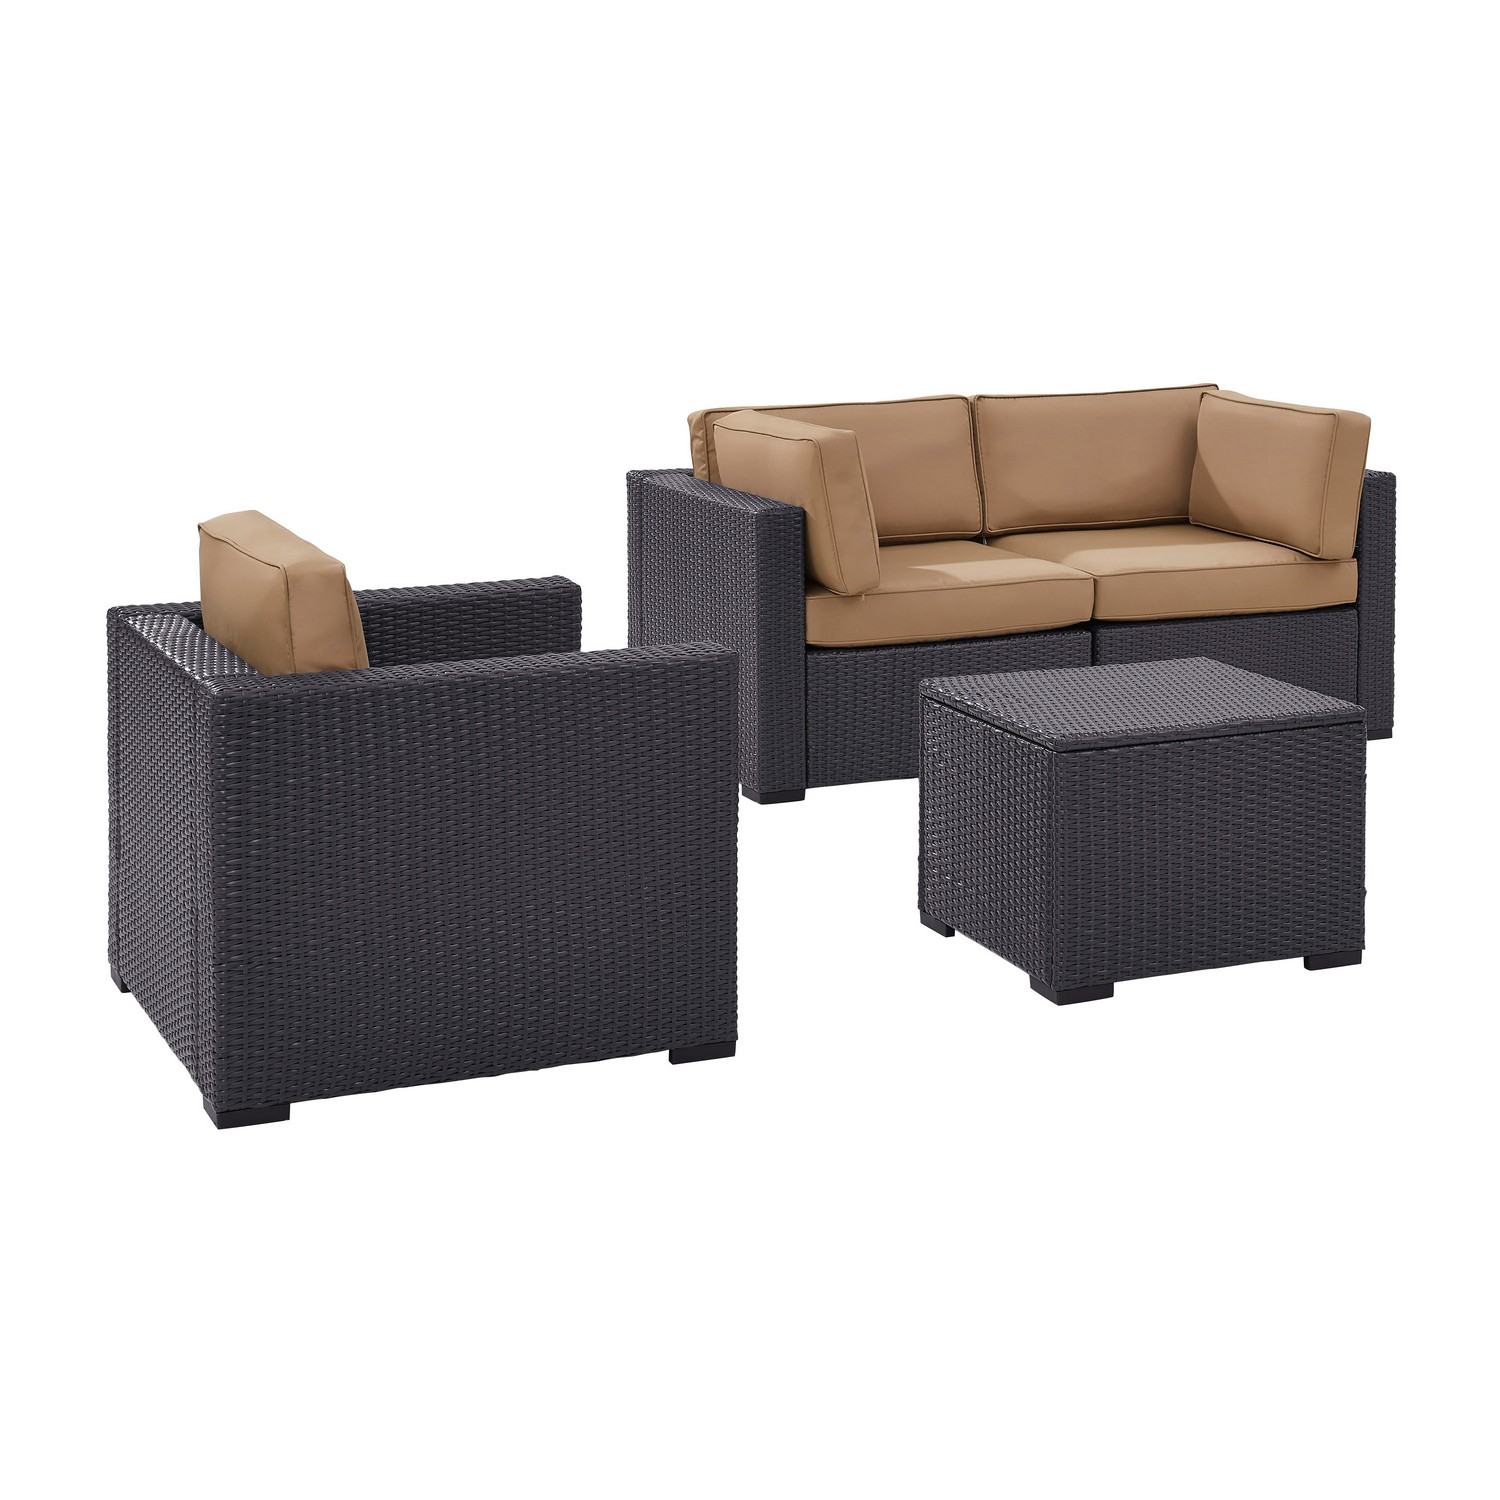 Crosley Biscayne 4-PC Outdoor Wicker Sectional Set - 2 Corner Chairs, Arm Chair, Coffee Table - Mocha/Brown